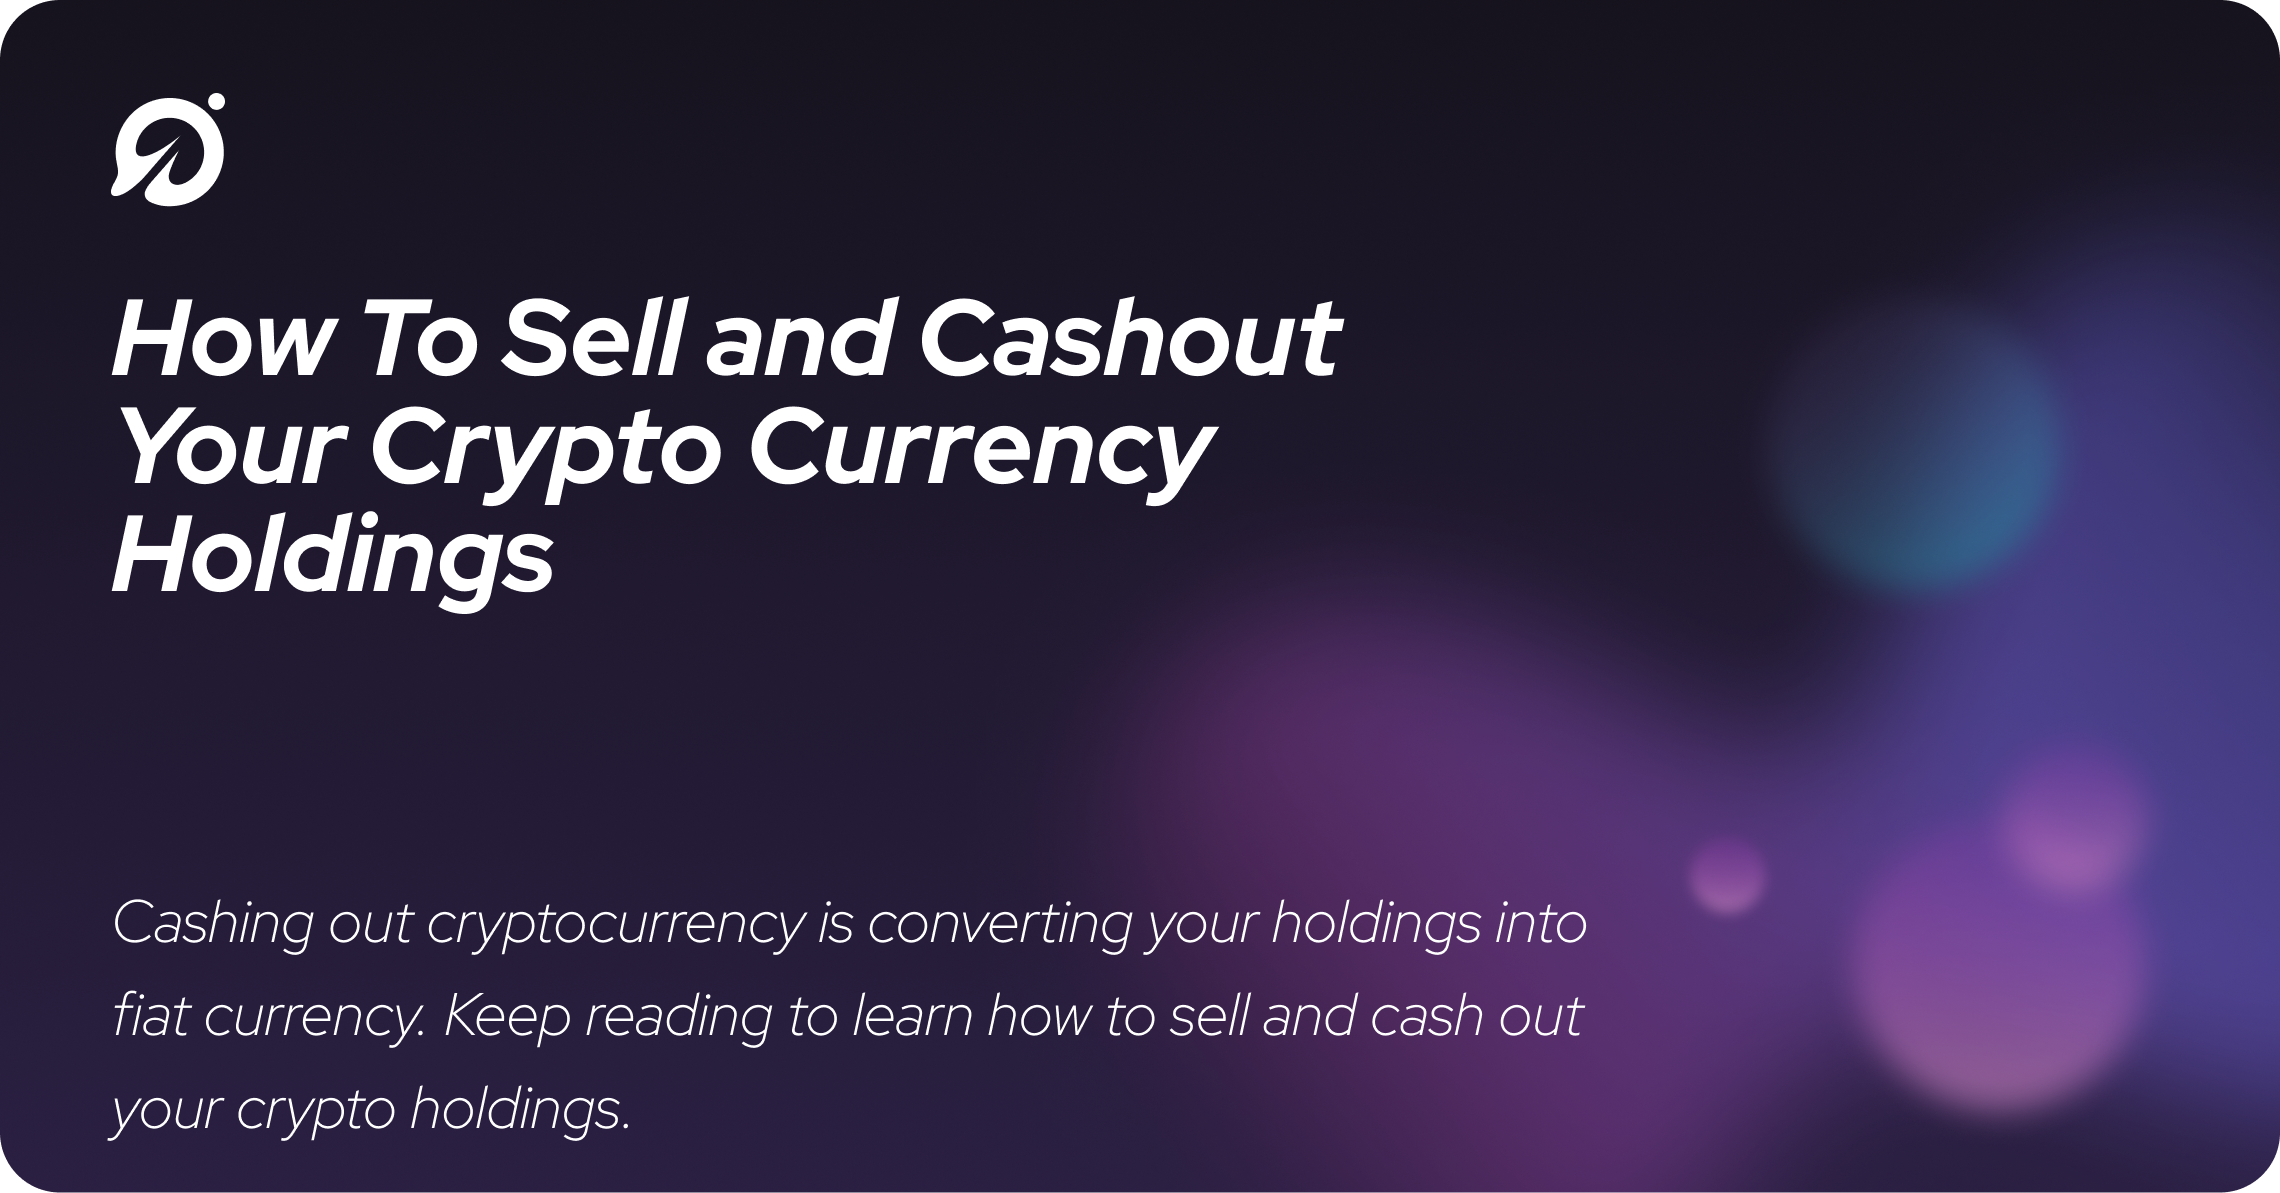 How To Sell and Cashout Your Crypto Currency Holdings